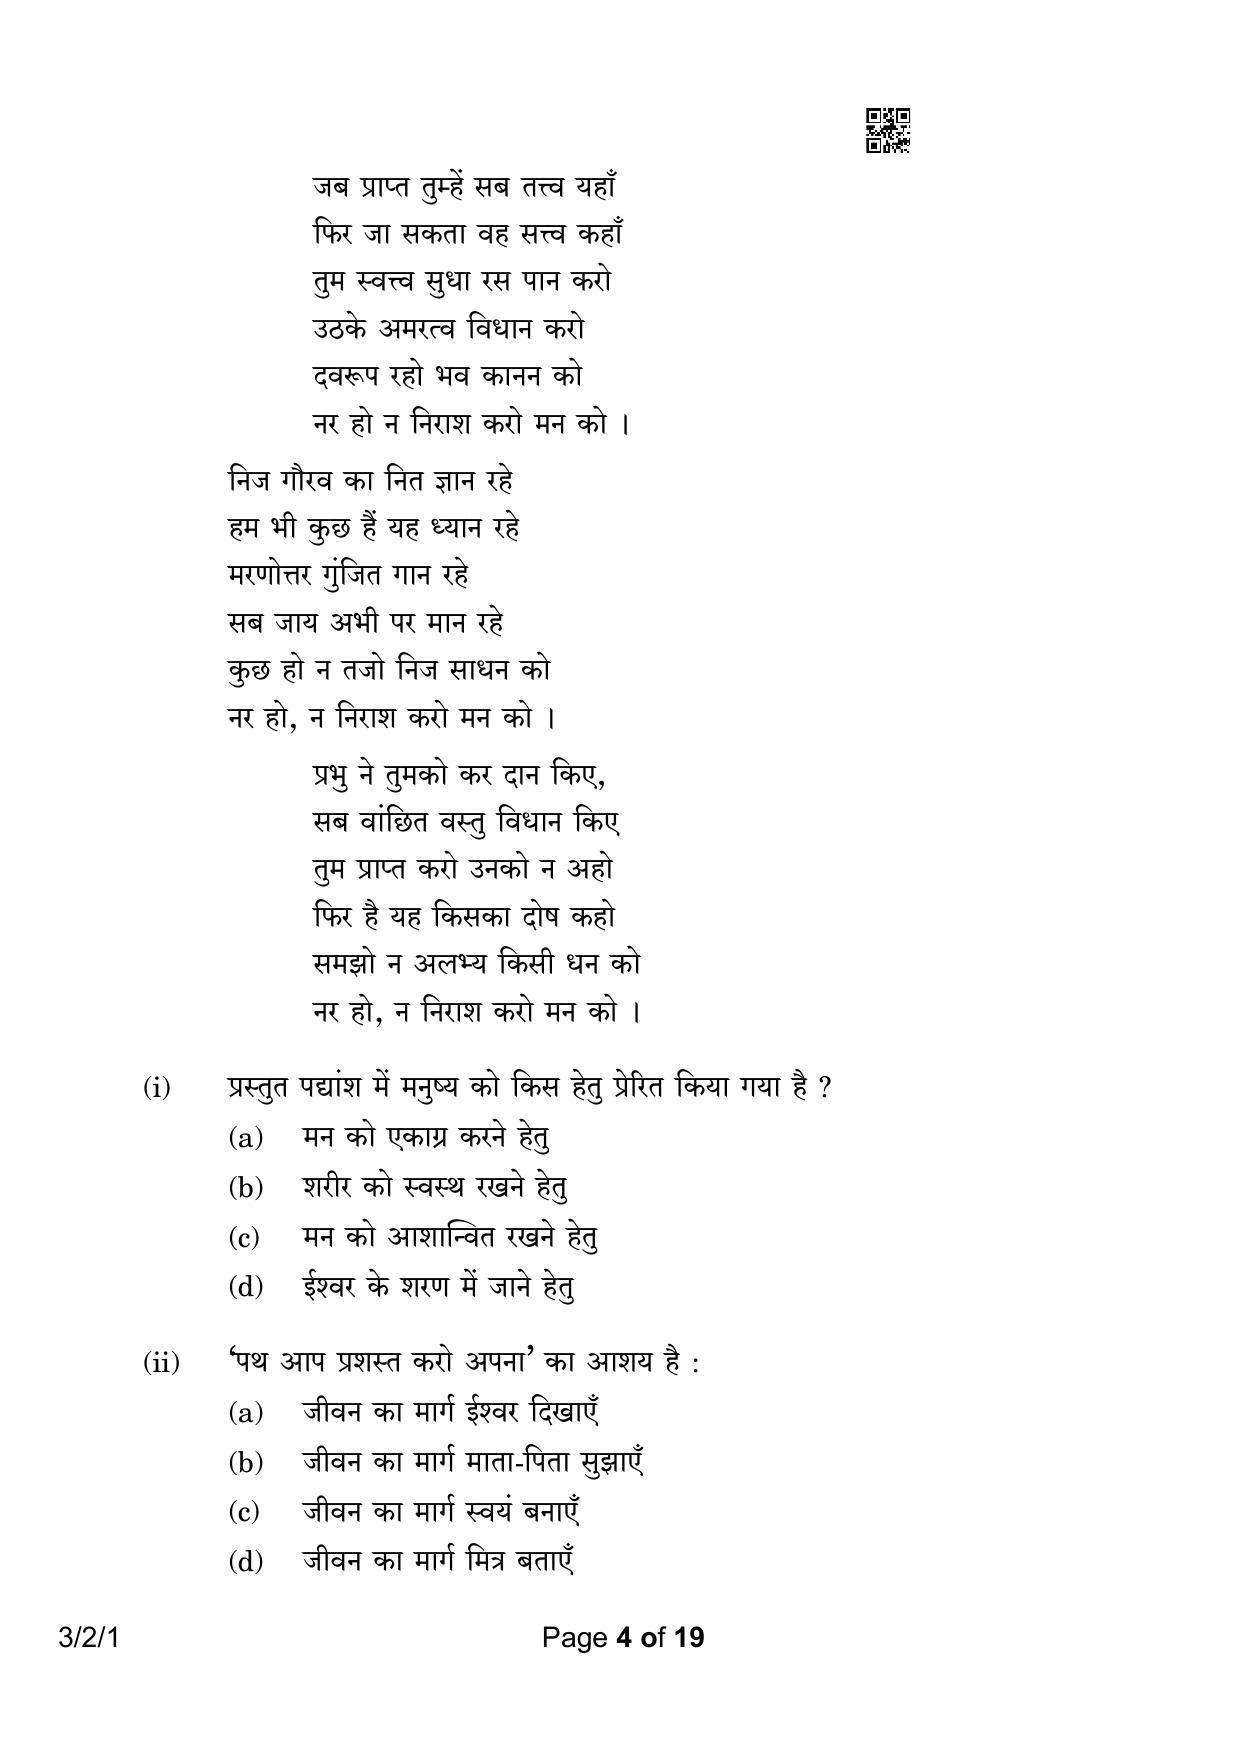 CBSE Class 10 3-2-1 Hindi A 2023 Question Paper - Page 4